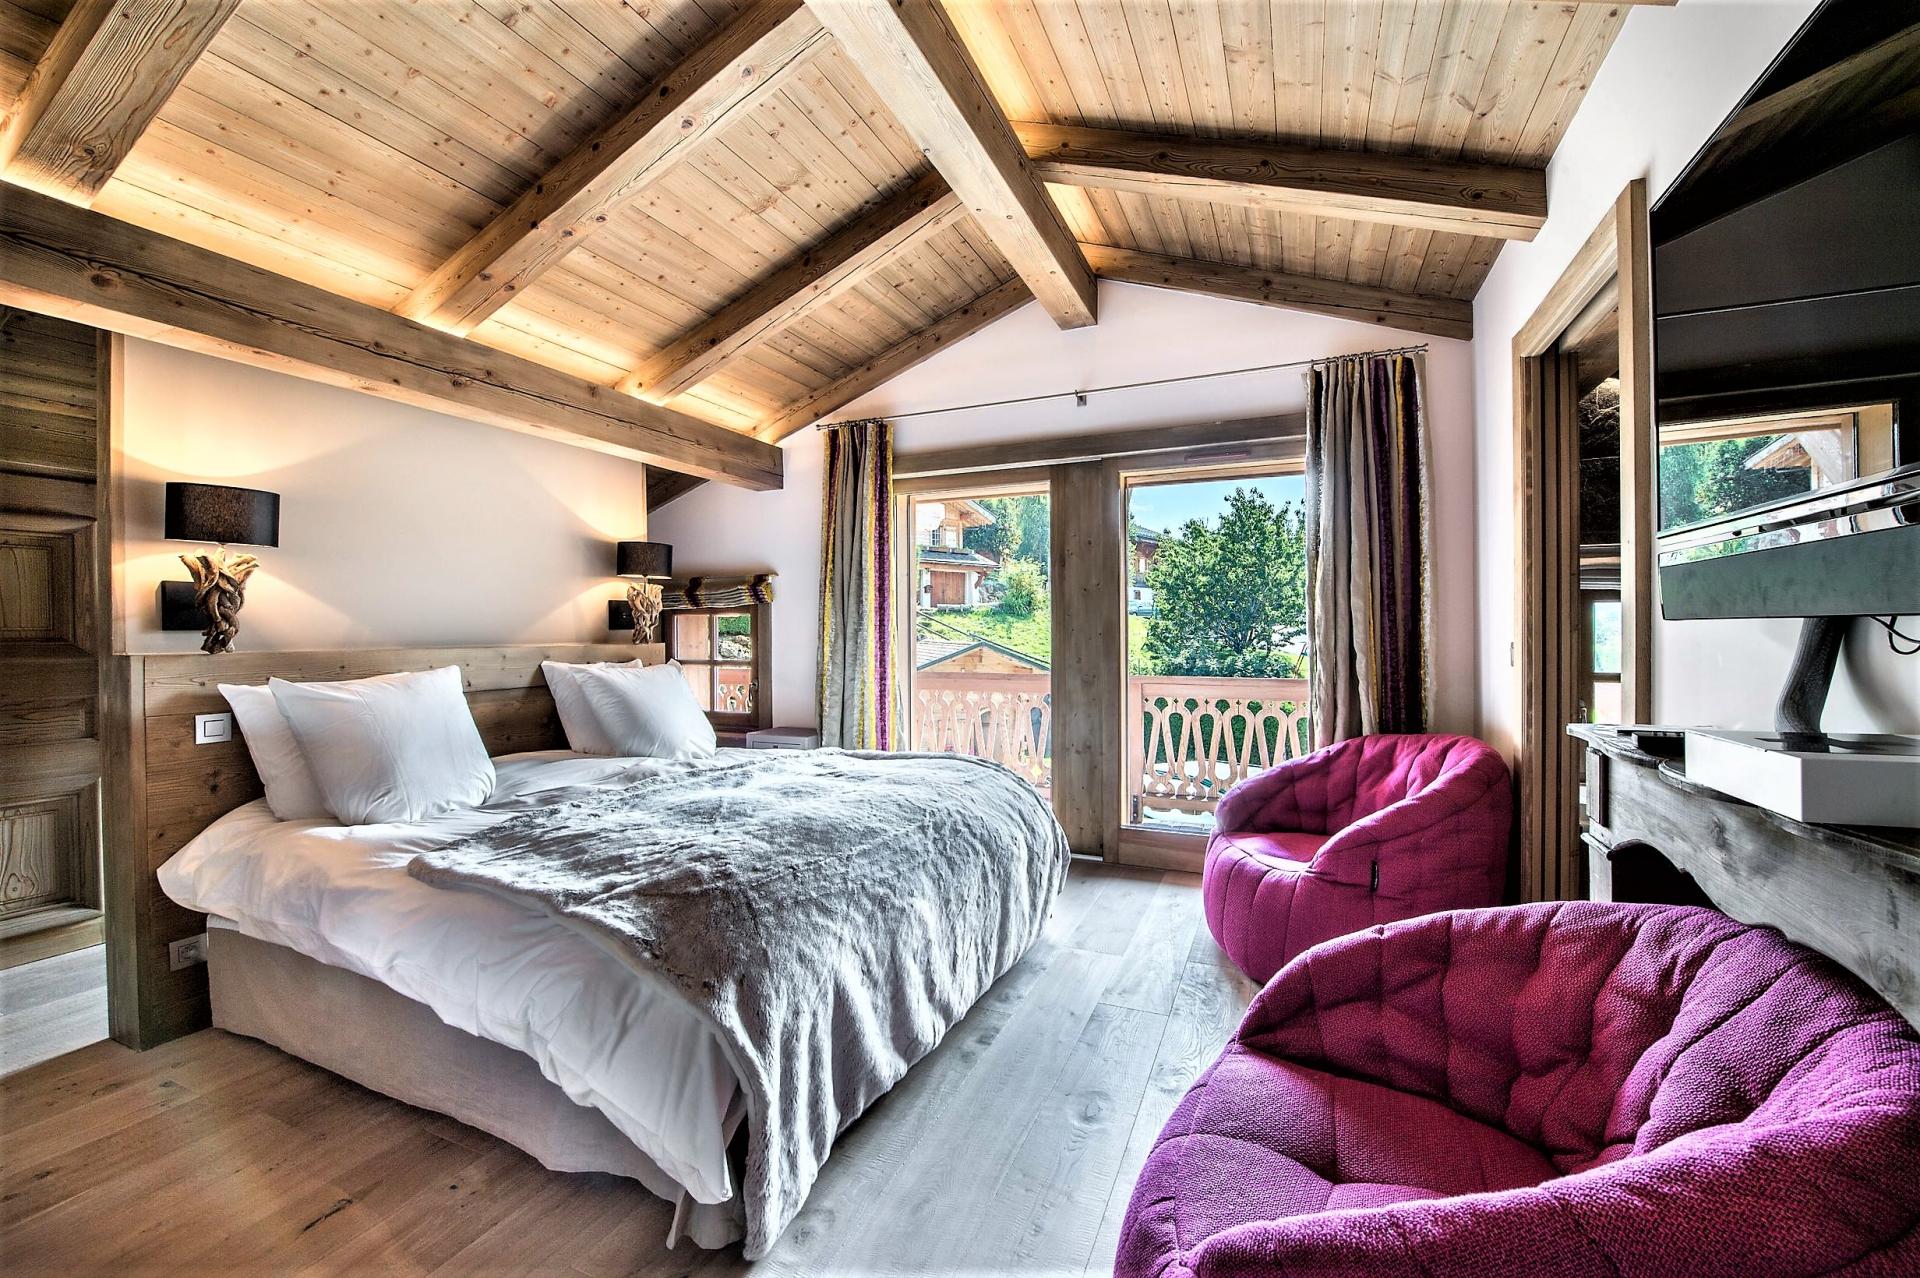 THE MASTER BEDROOM IN A CHALET RENTAL IN THE FRENCH ALPS